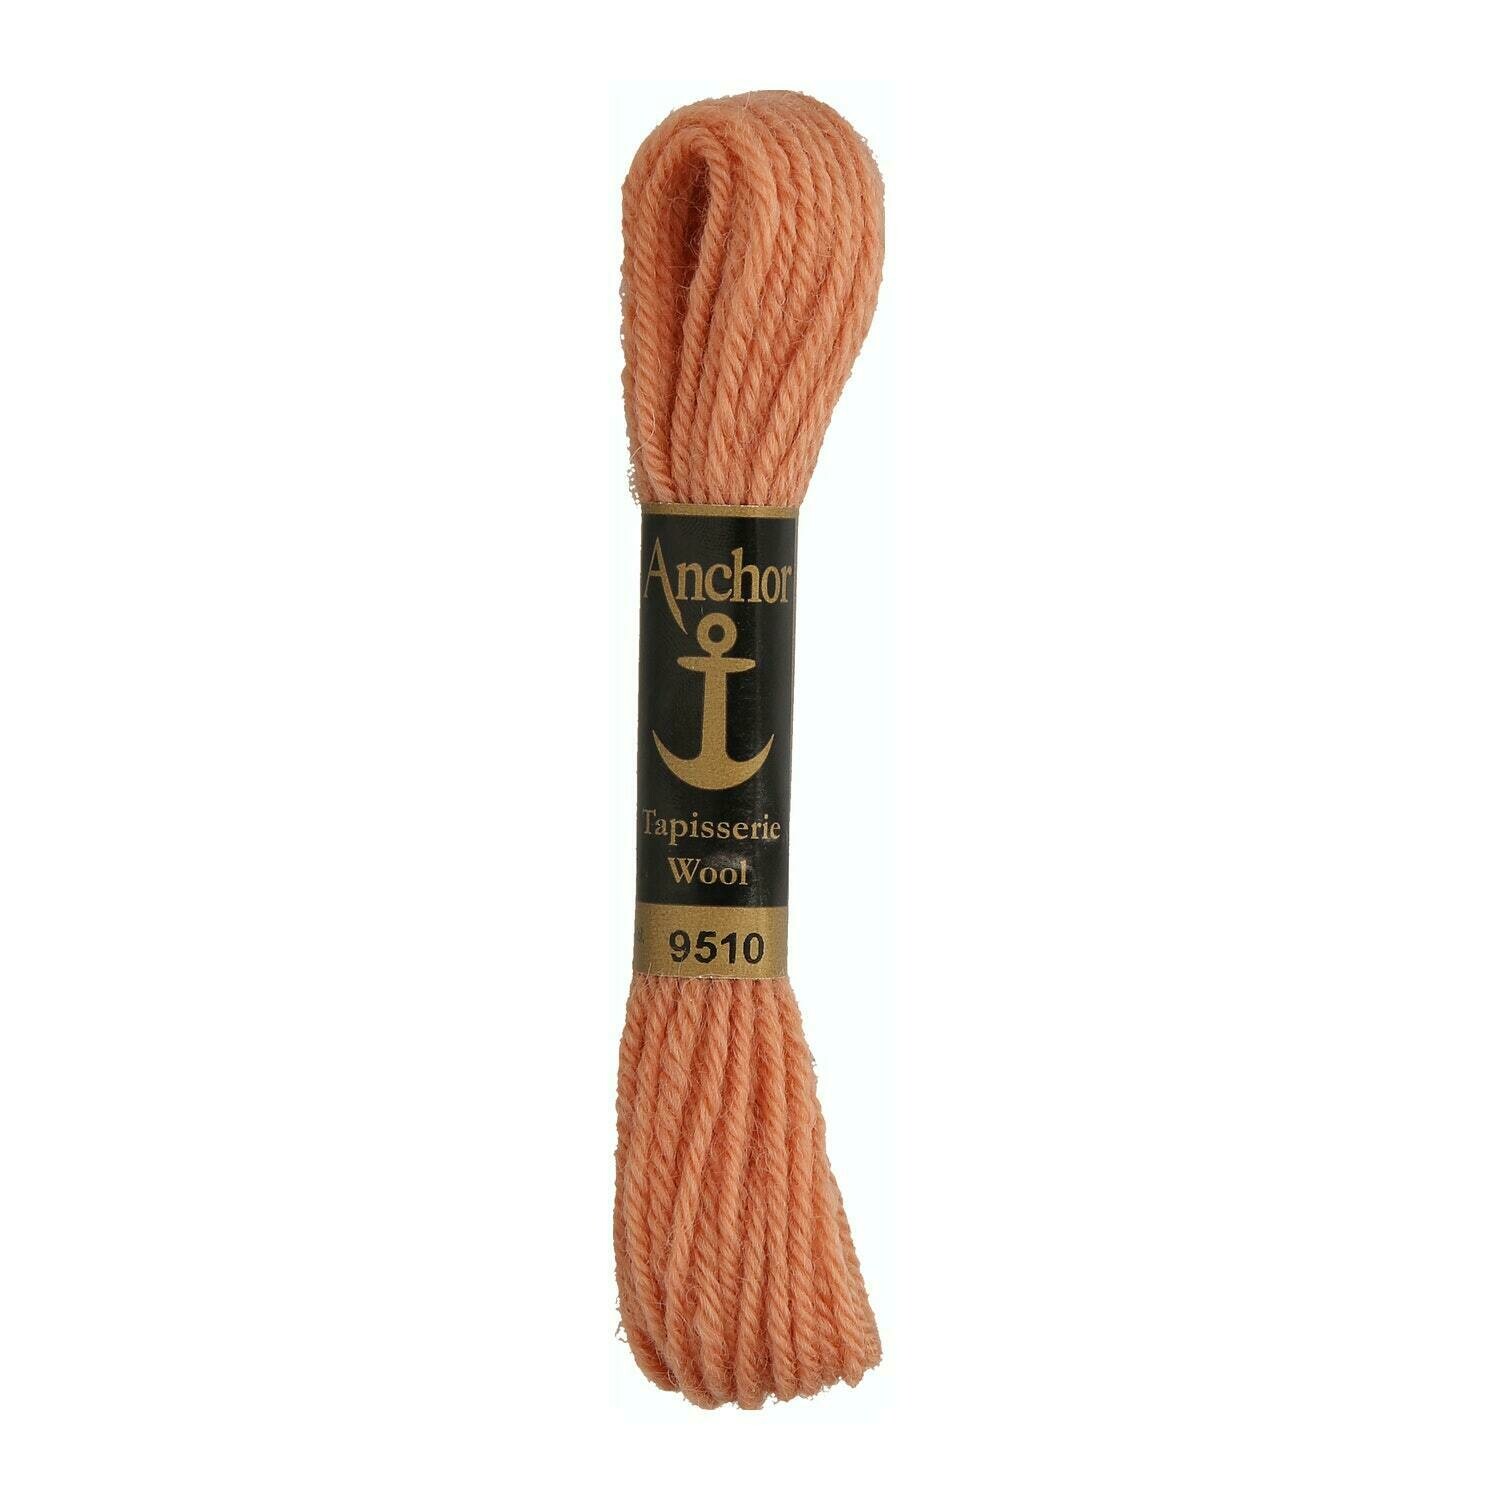 Anchor Tapisserie Wool #09510